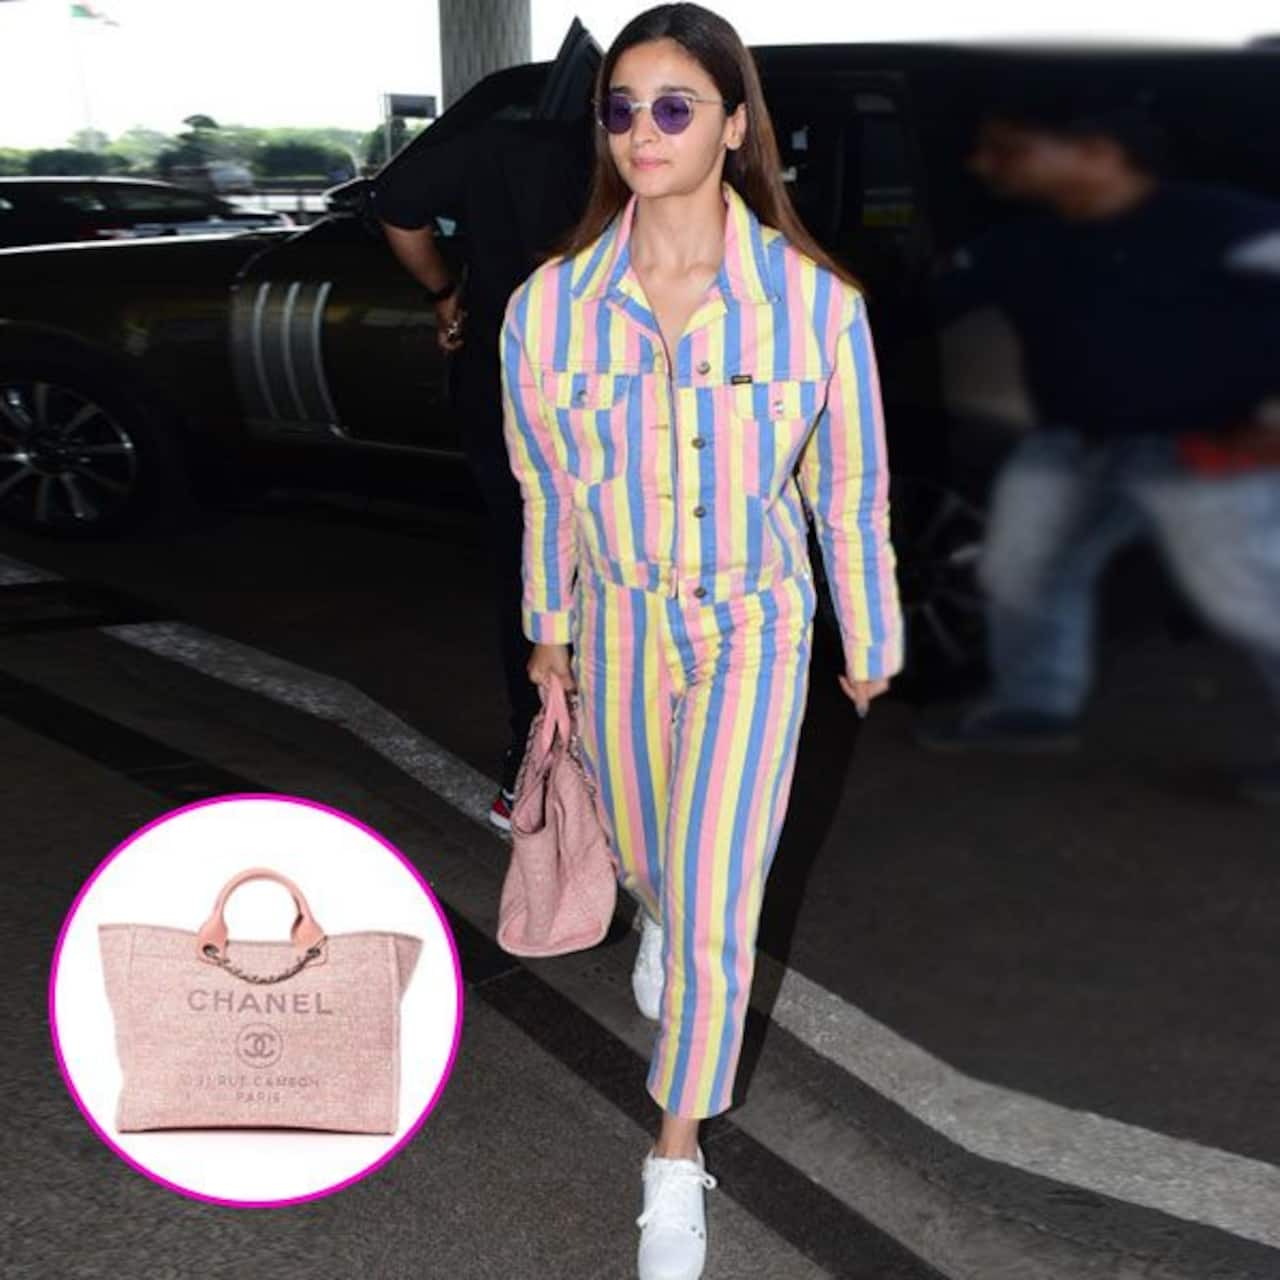 Guess The Price! Alia Bhatt's pink tote bag comes with a caution: 'Buy at your own risk'